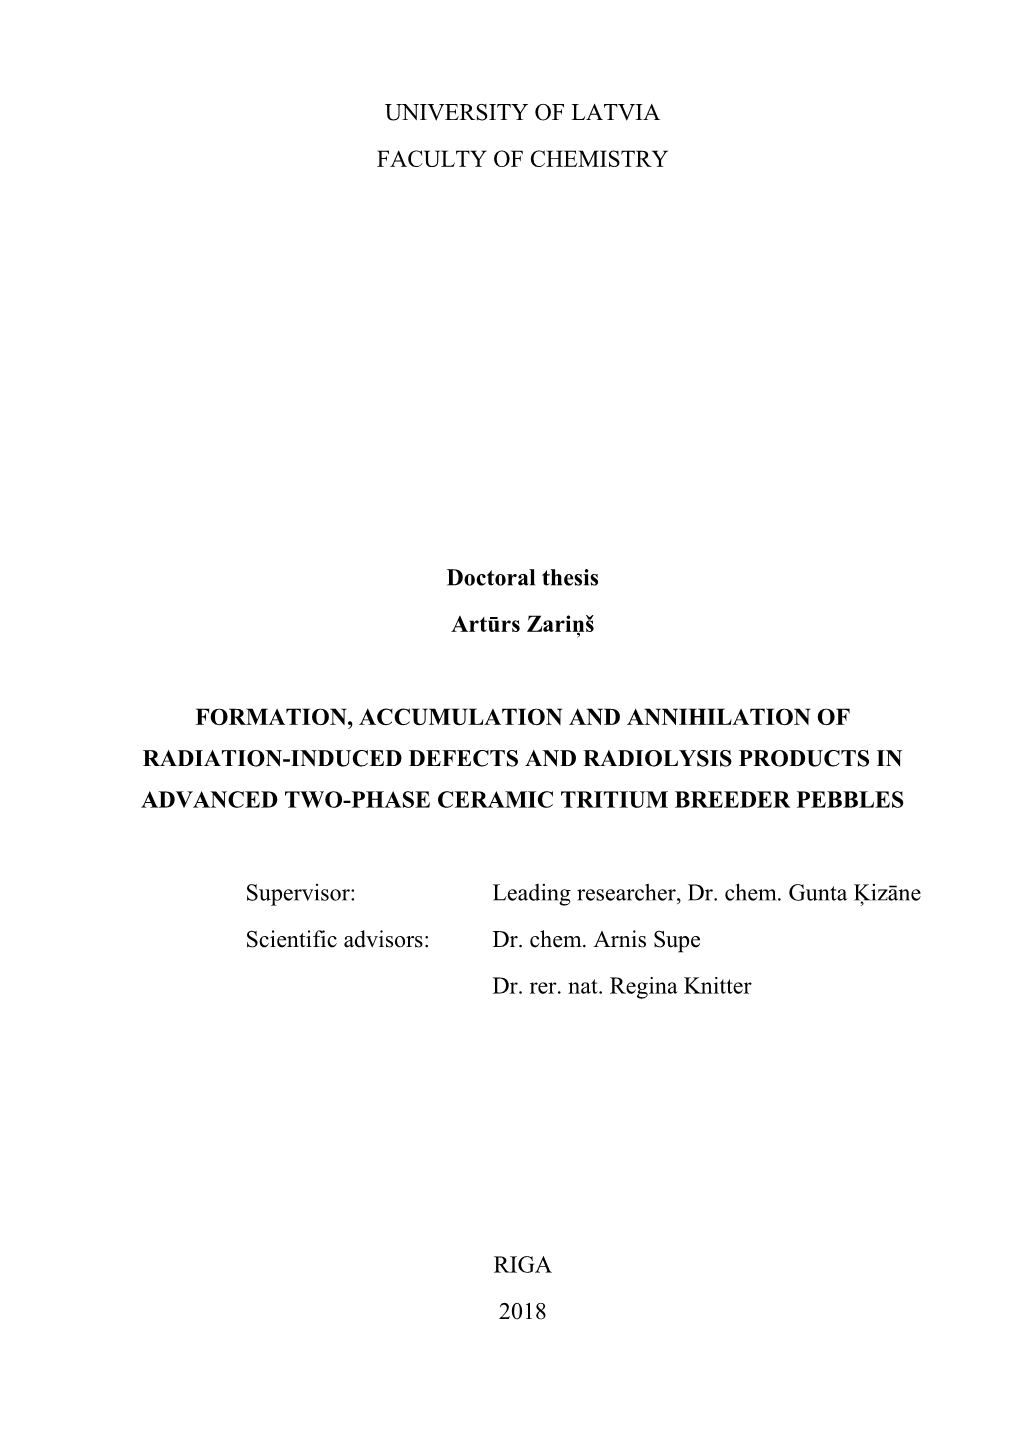 UNIVERSITY of LATVIA FACULTY of CHEMISTRY Doctoral Thesis